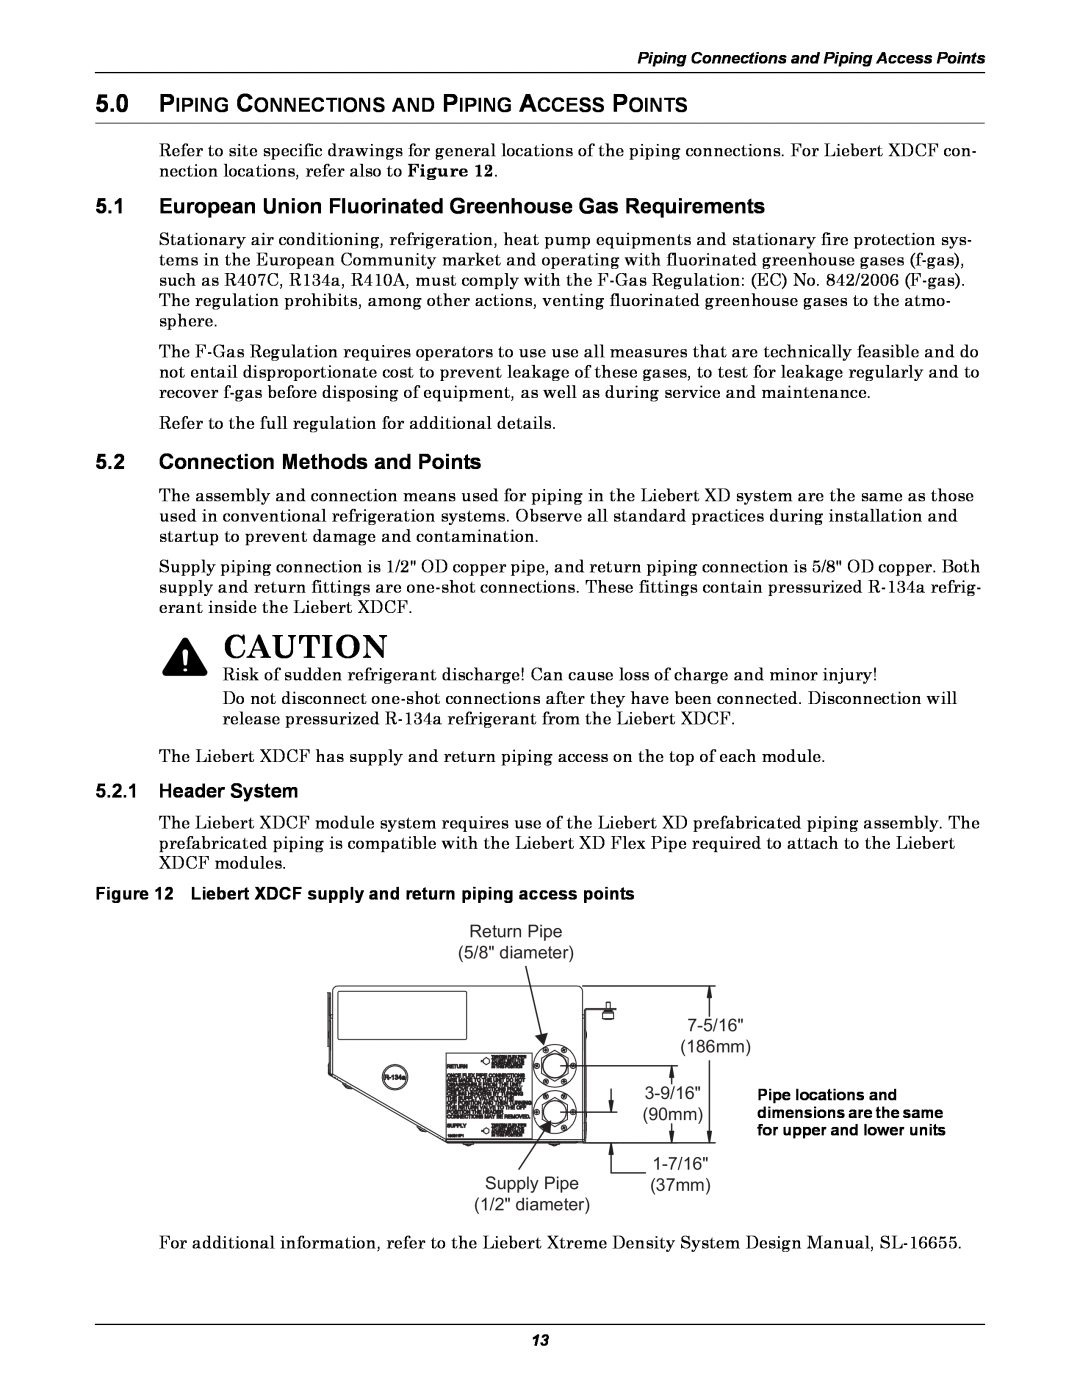 Emerson XDCF European Union Fluorinated Greenhouse Gas Requirements, Connection Methods and Points, Header System 